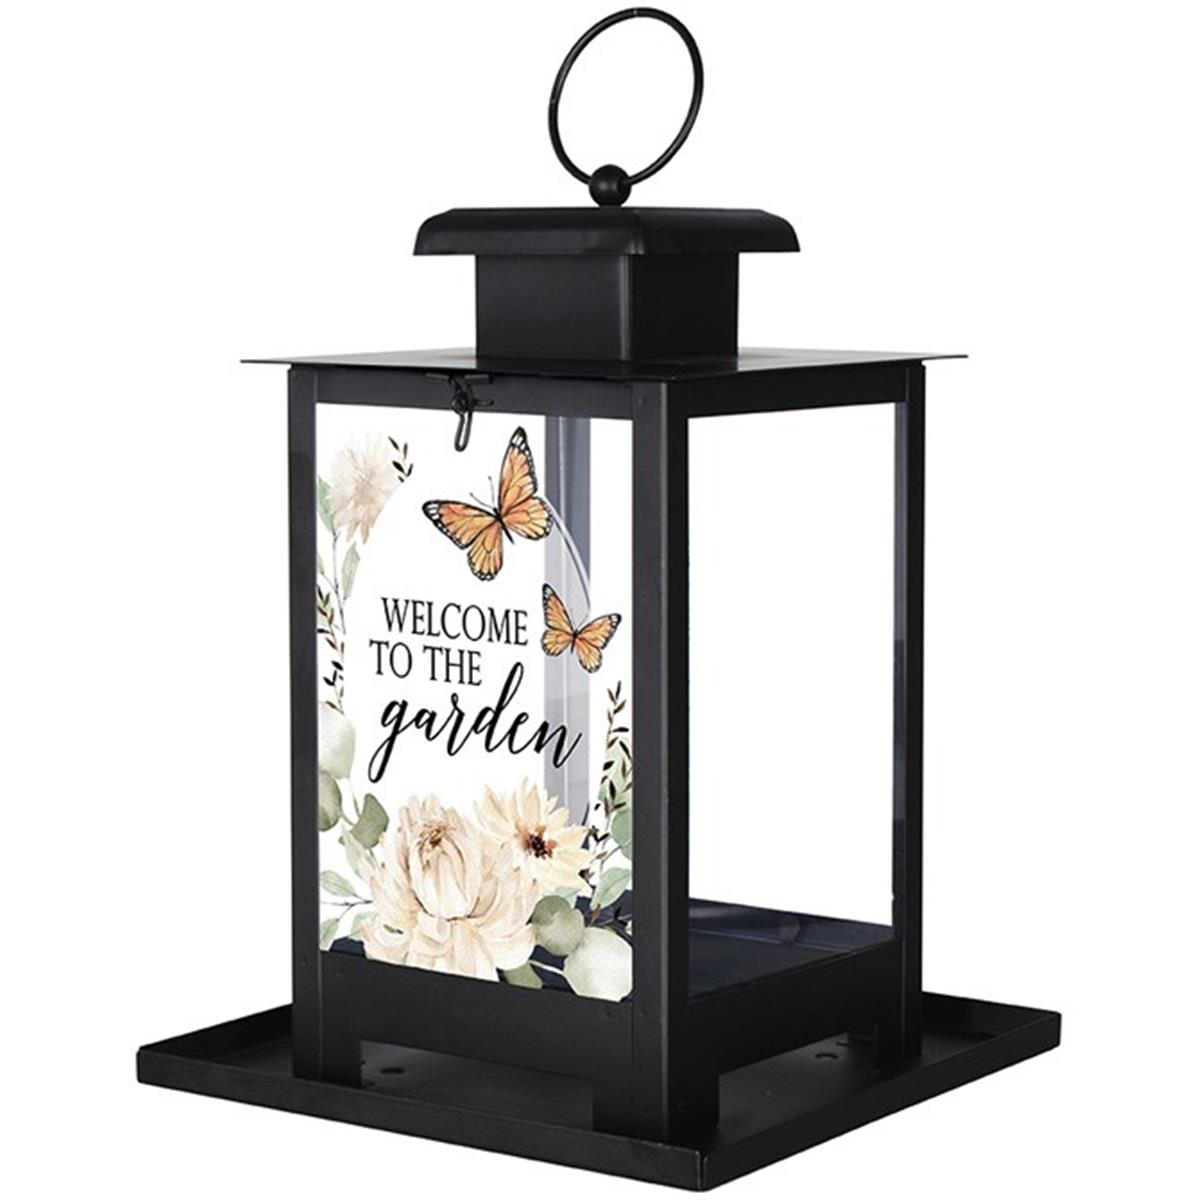 Picture of Carson Home Accents 215103 12 x 7 x 7 in. Welcome to the Garden Bird Feeder